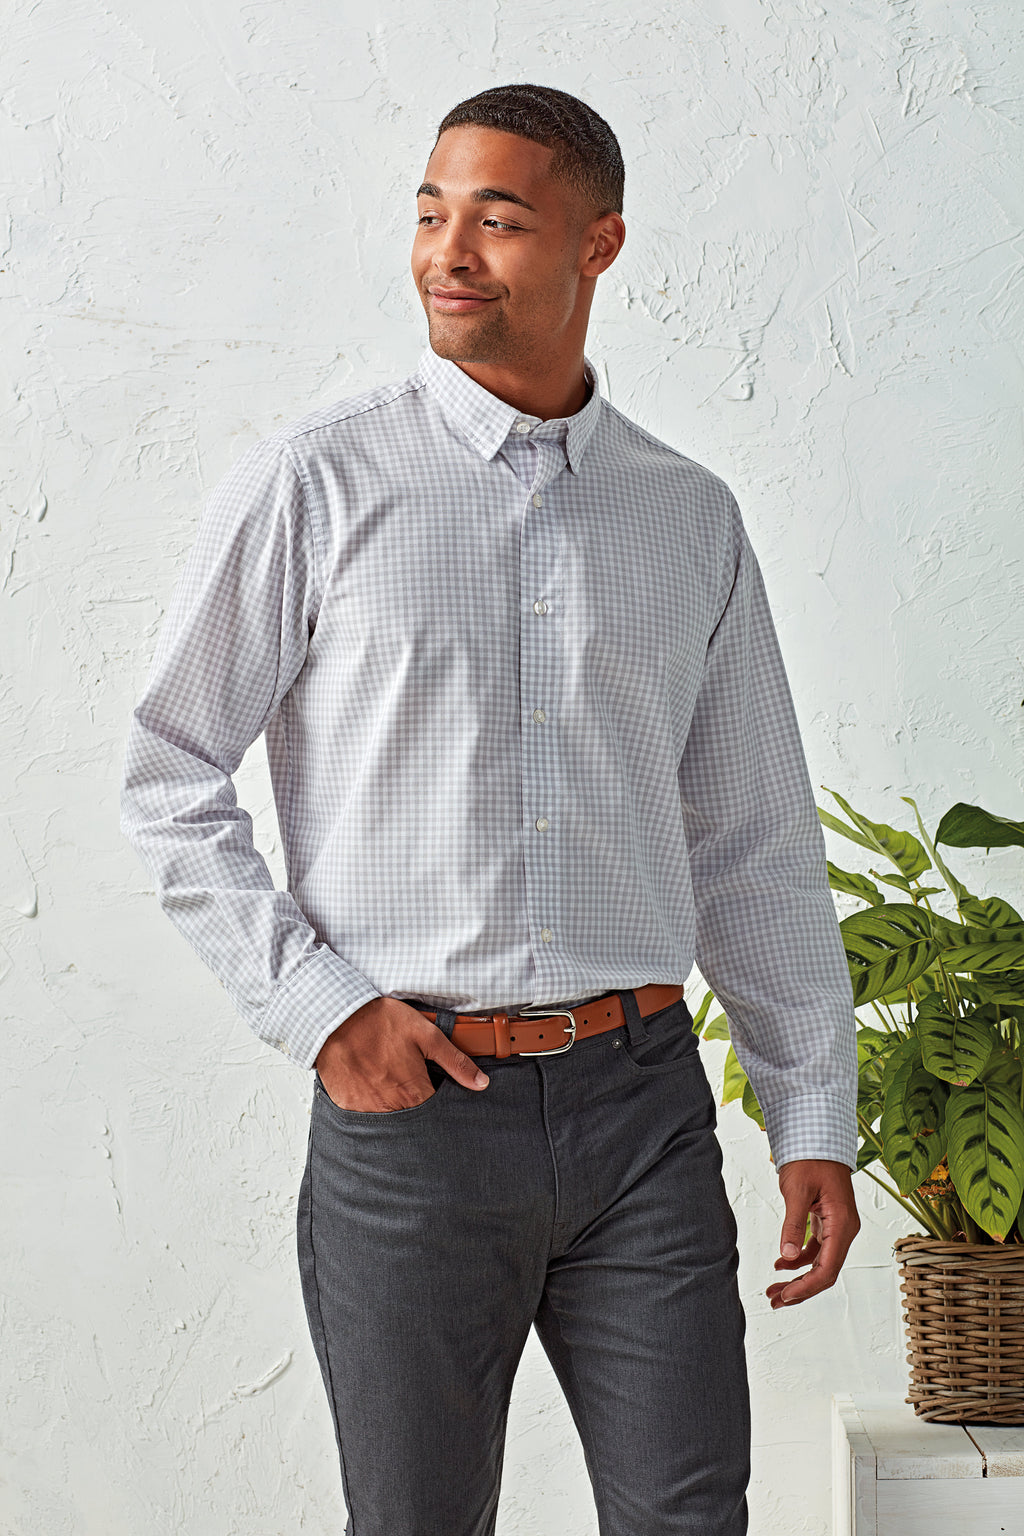 Maxton check long sleeve shirt - Premier Collection